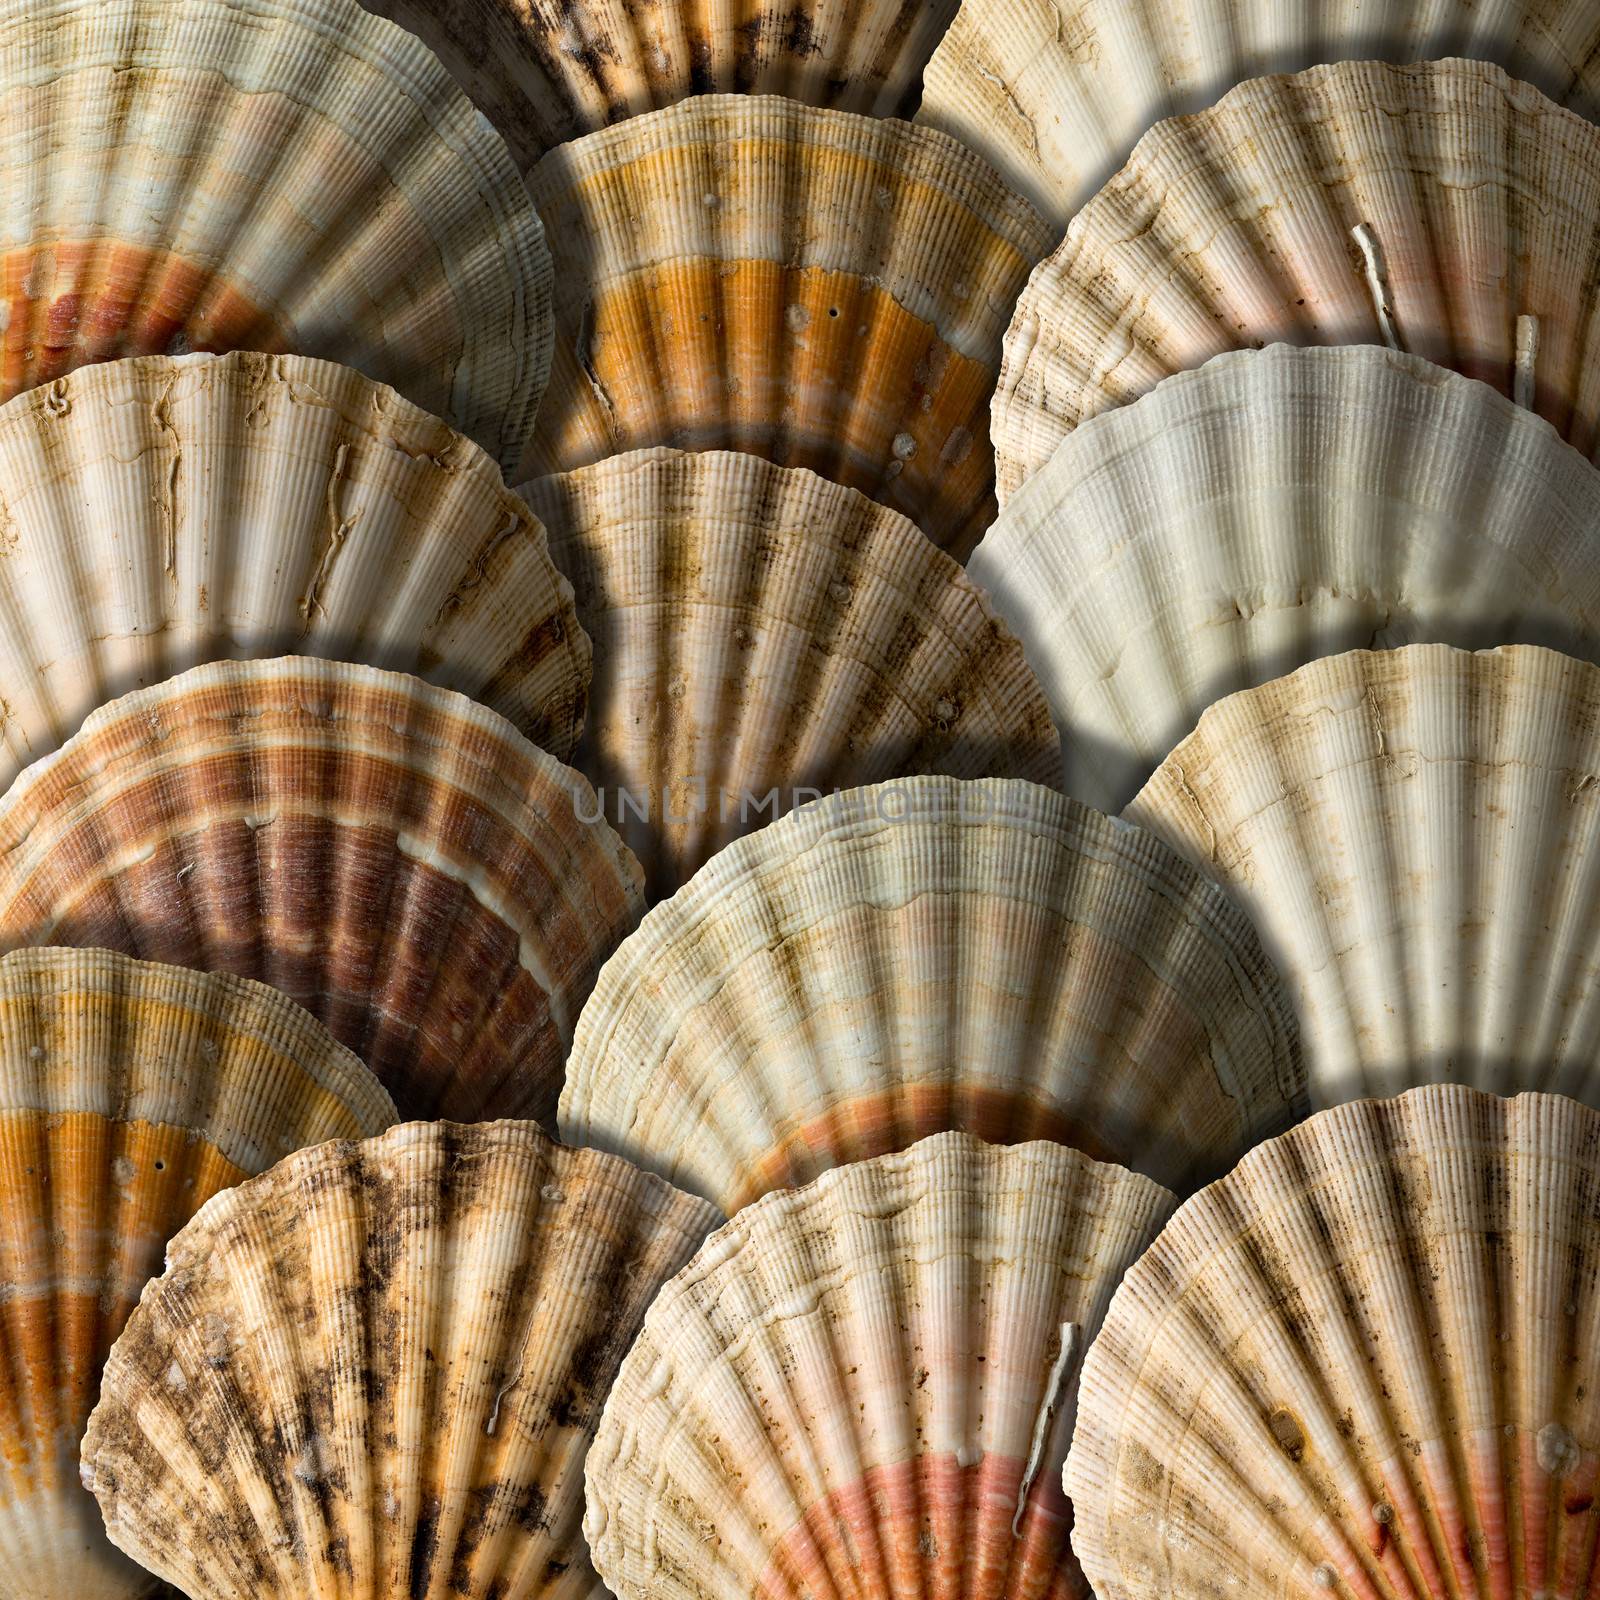 Background with many overlapping scallop shells with shadows